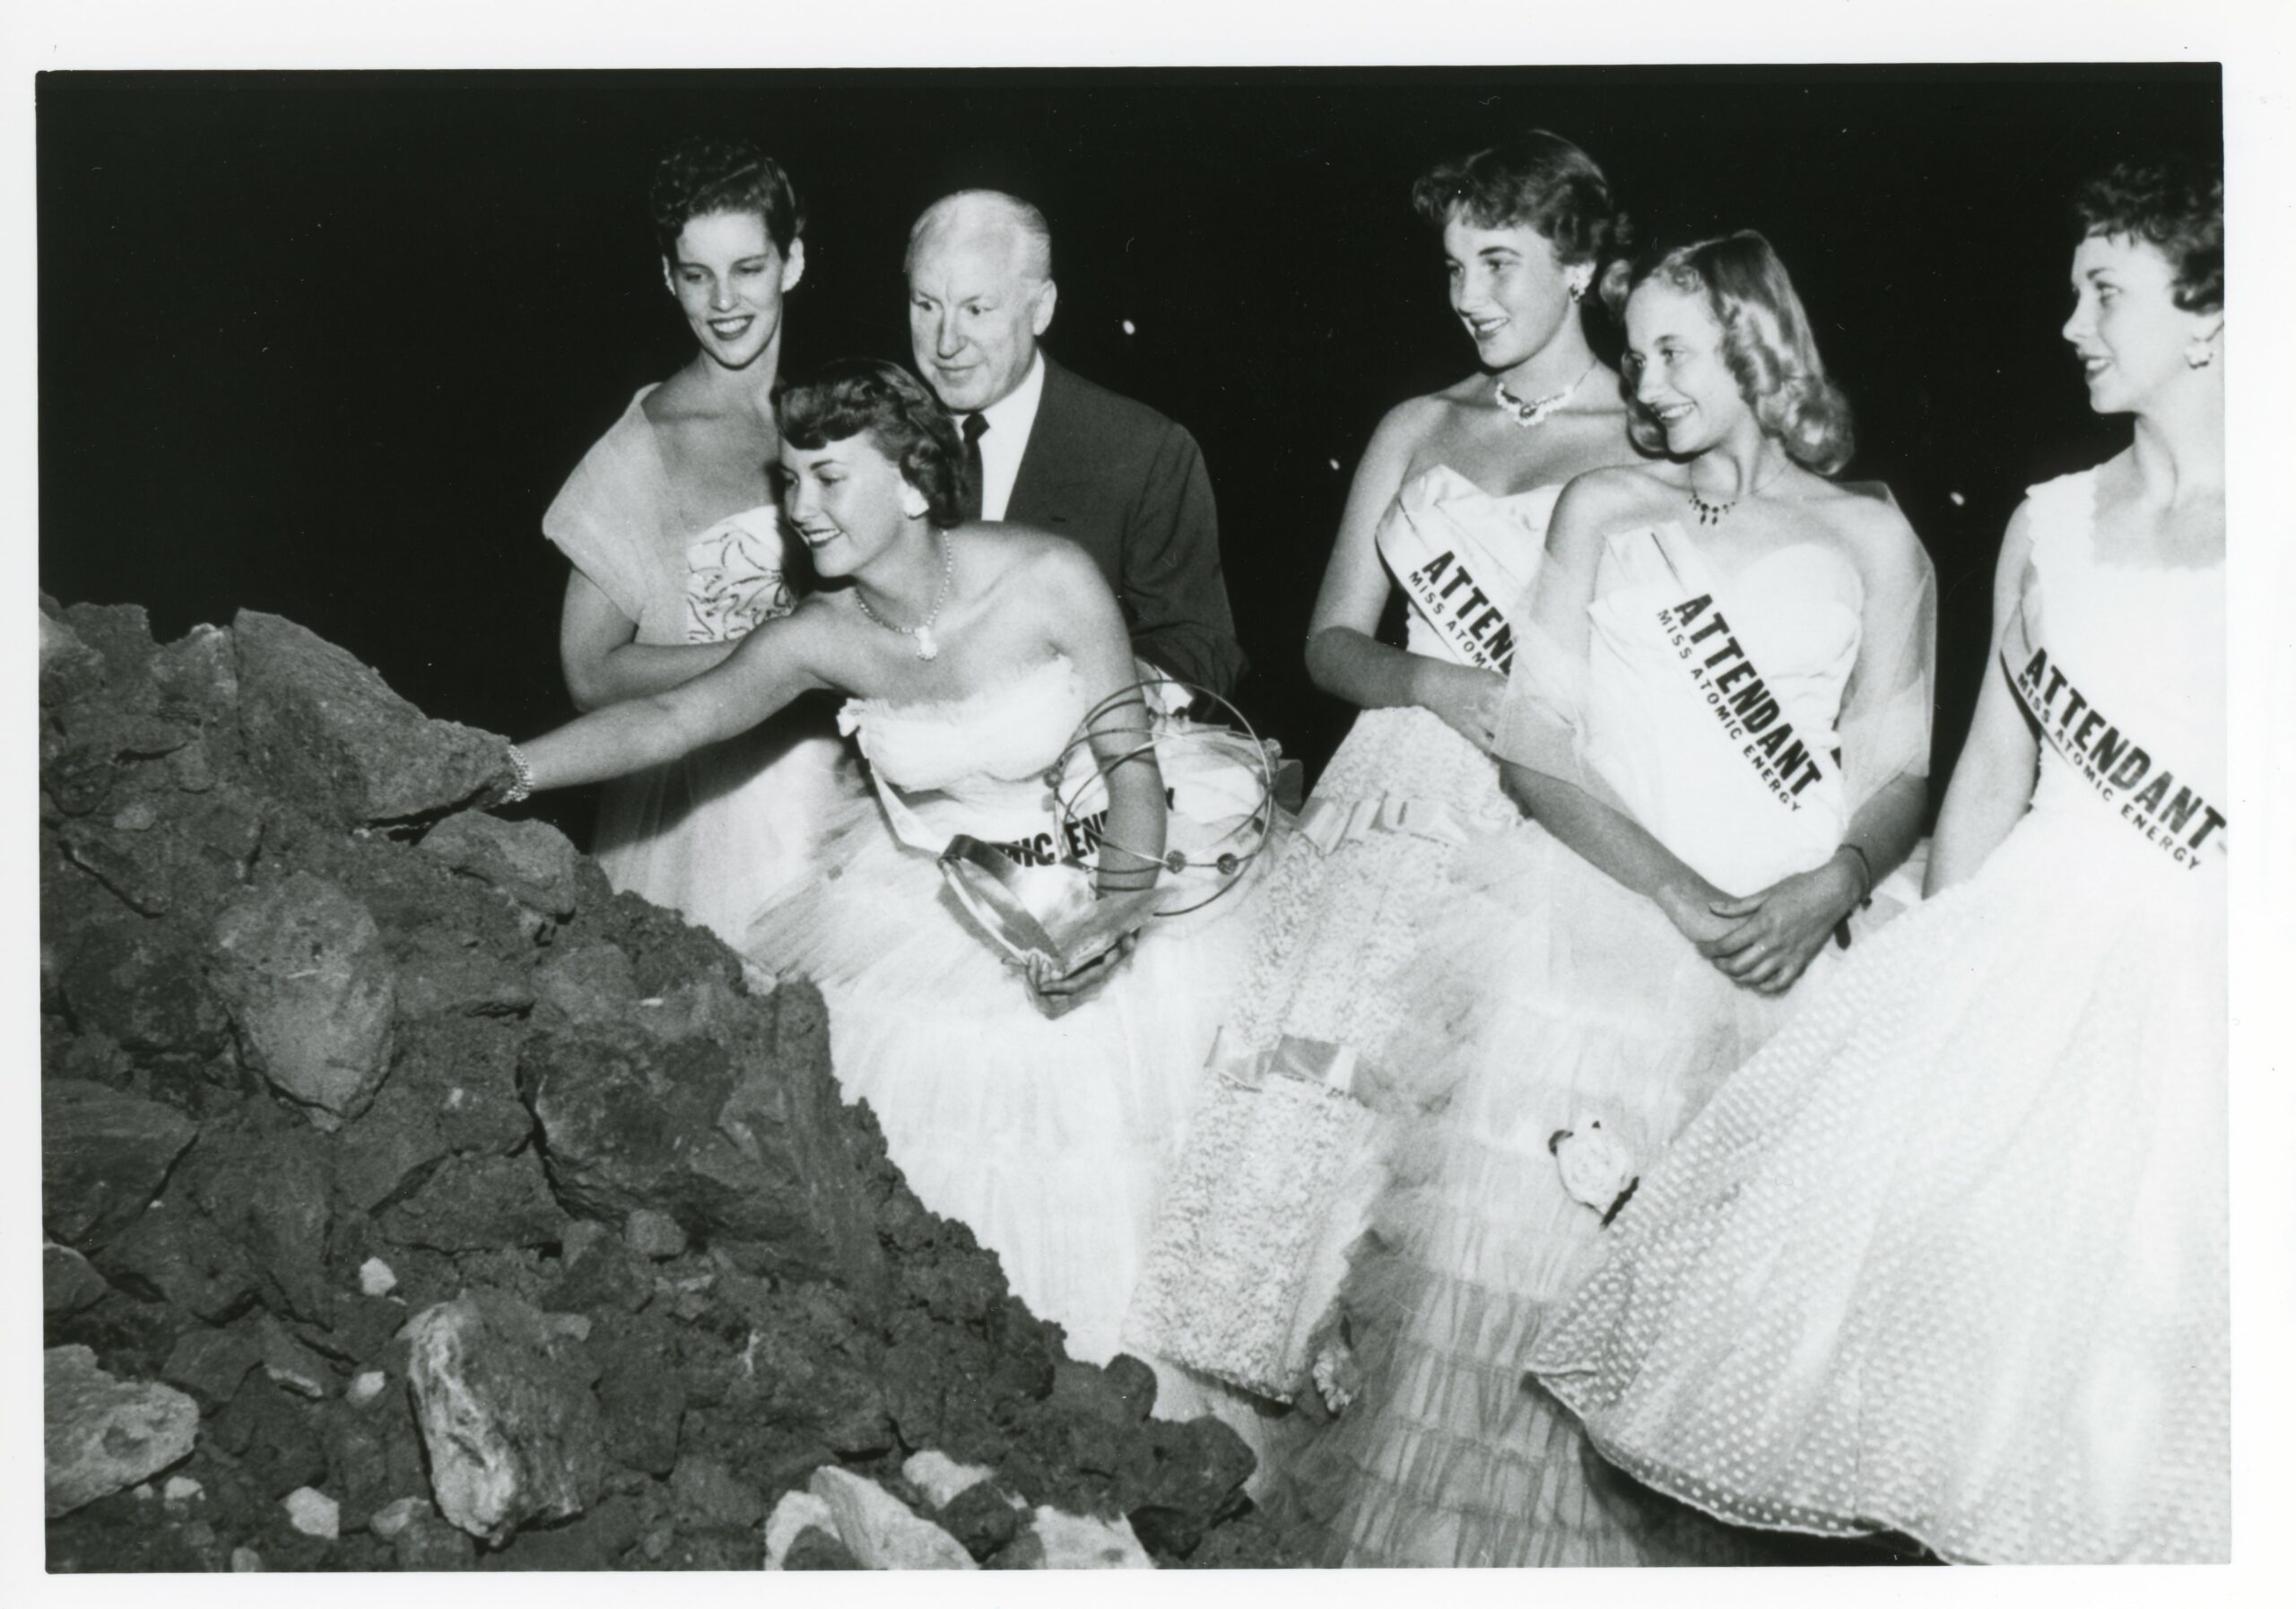 Beauty queens picking up a piece of uranium ore out of a pile.